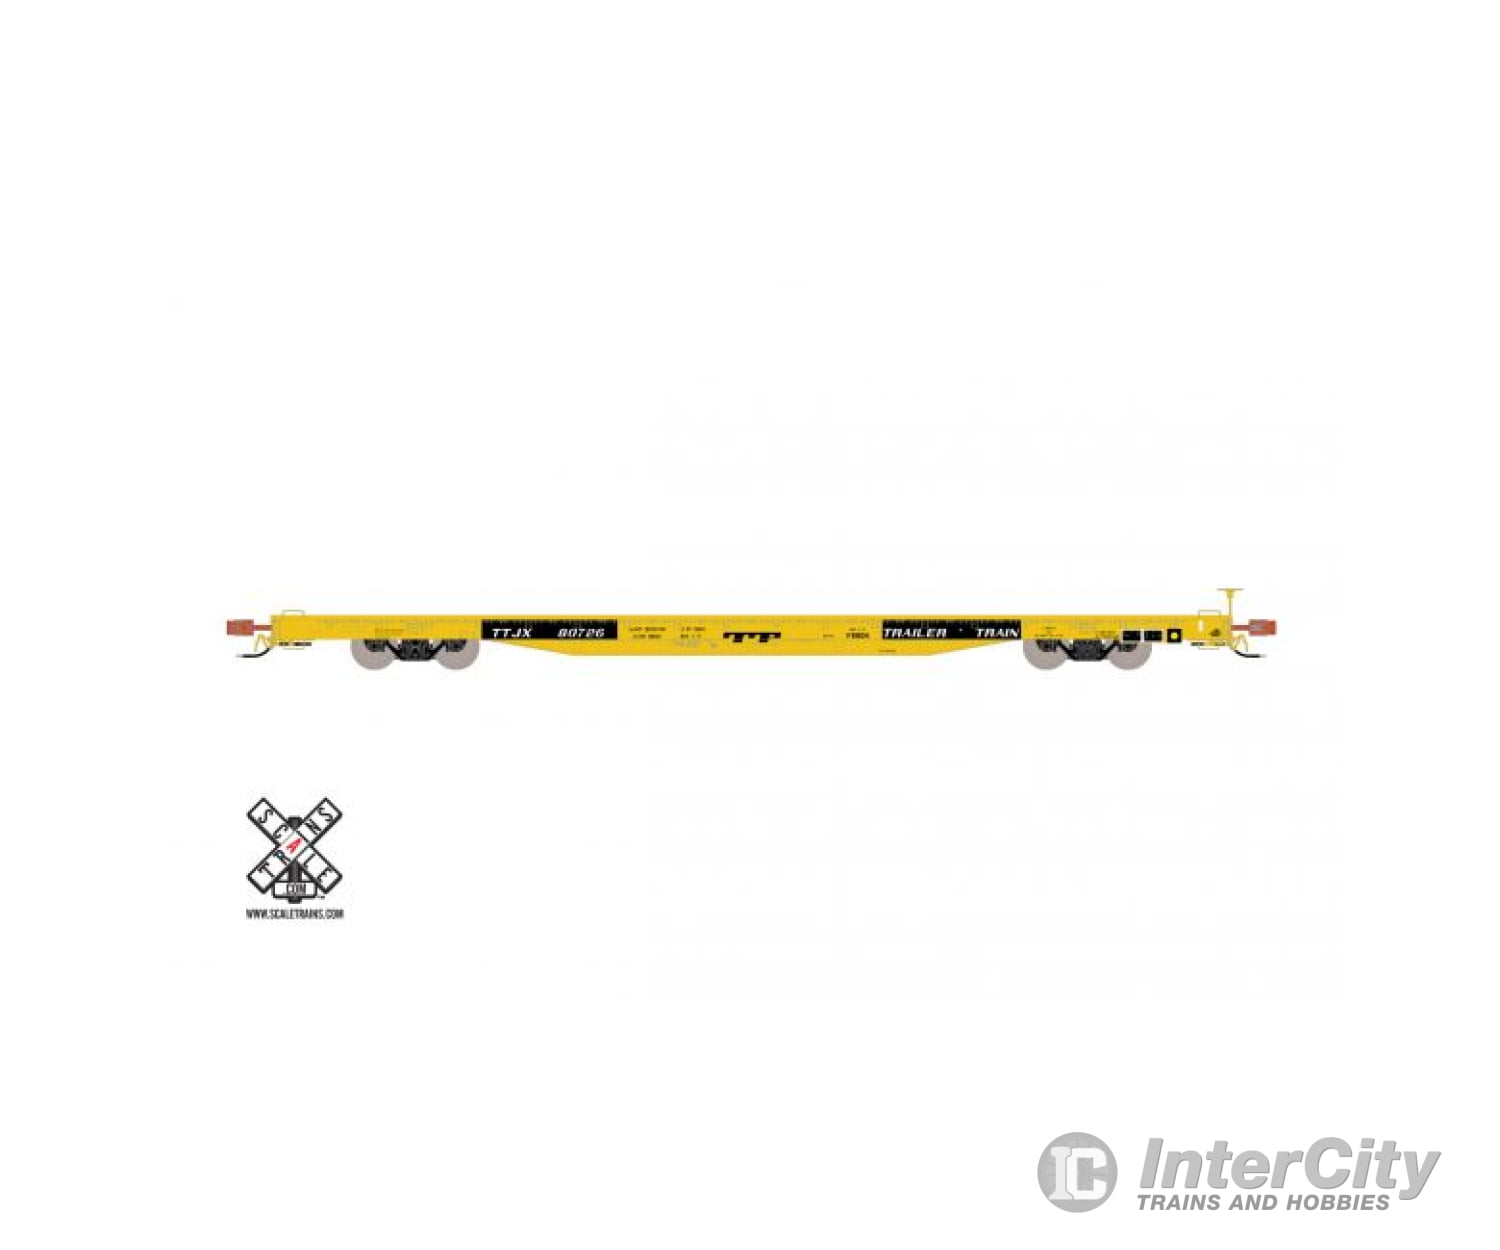 Scale Trains Sxt32723 Rivet Counter Ho Bsc F68Dh Flat Car Trailer Train/As Delivered/Ttjx Rd#80726